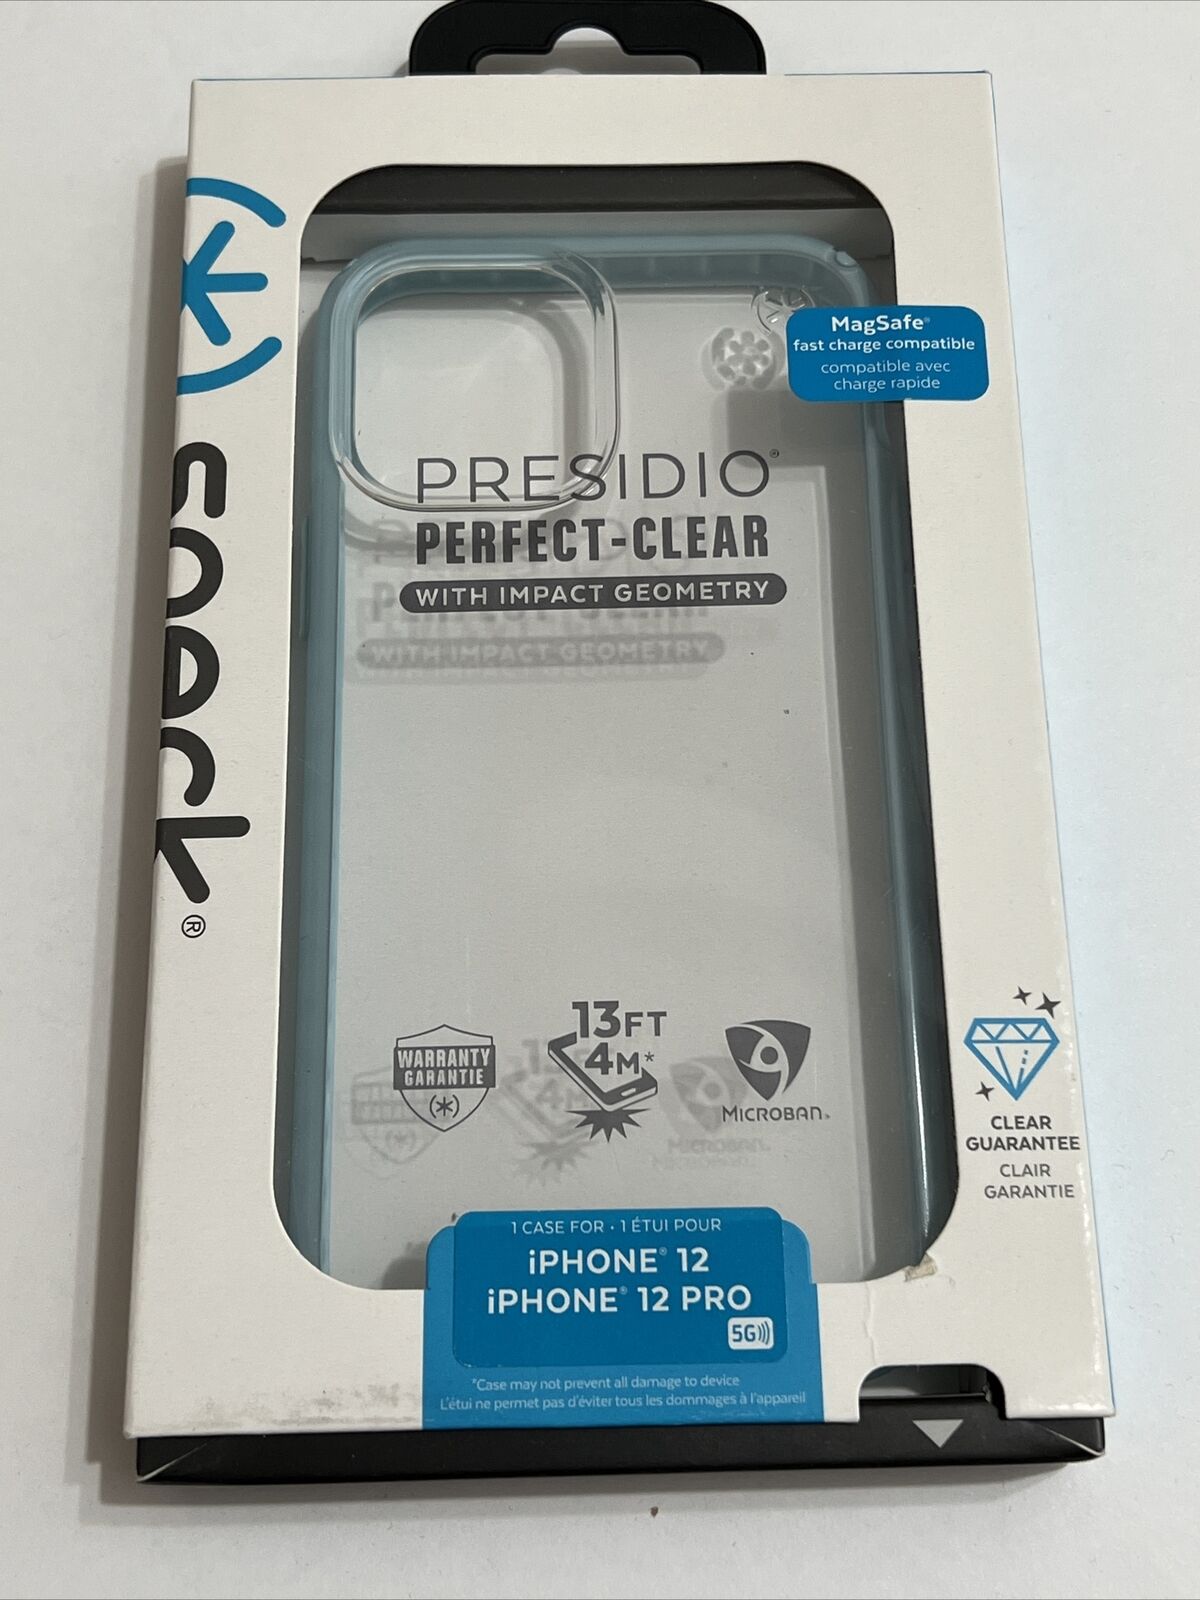 Presidio Perfect-Clear With Impact Geometry Iphone 12 / Iphone 12 Pro Cases